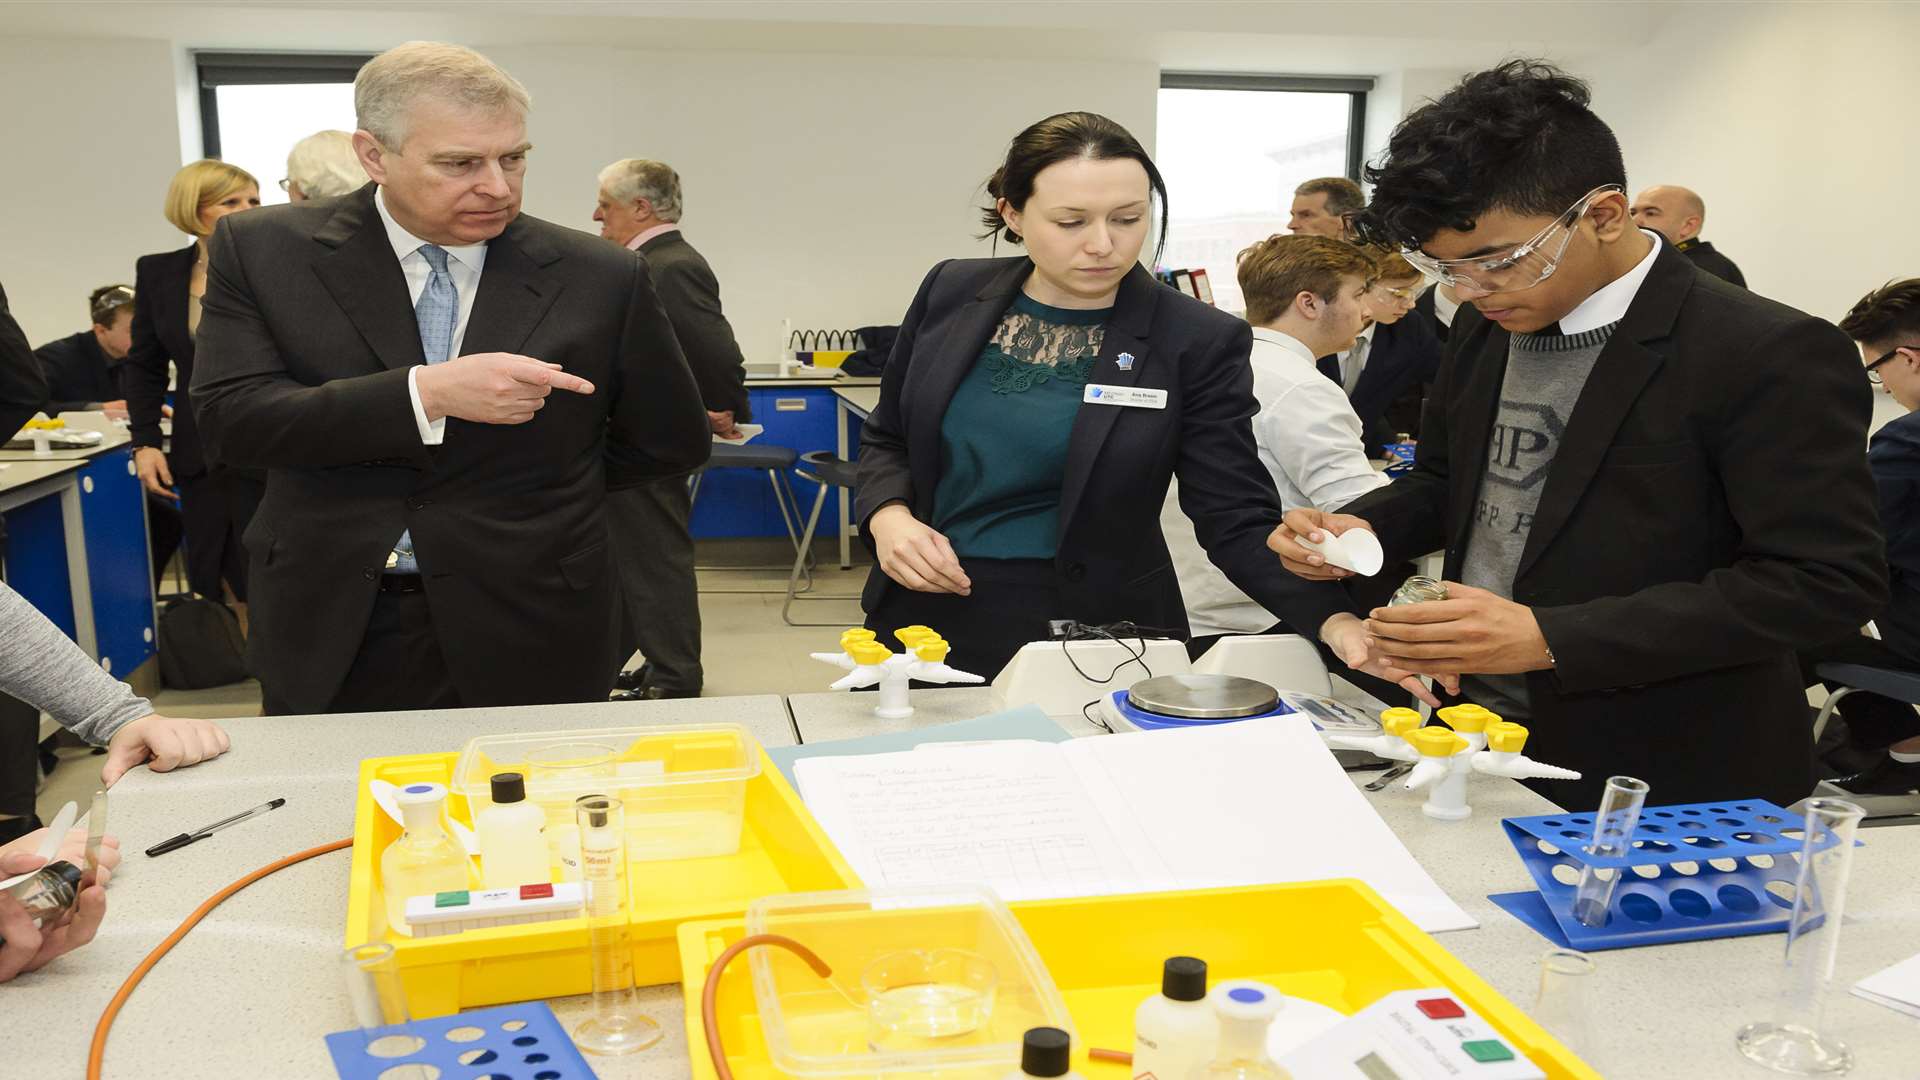 HRH the Duke of York meets chemists in a class